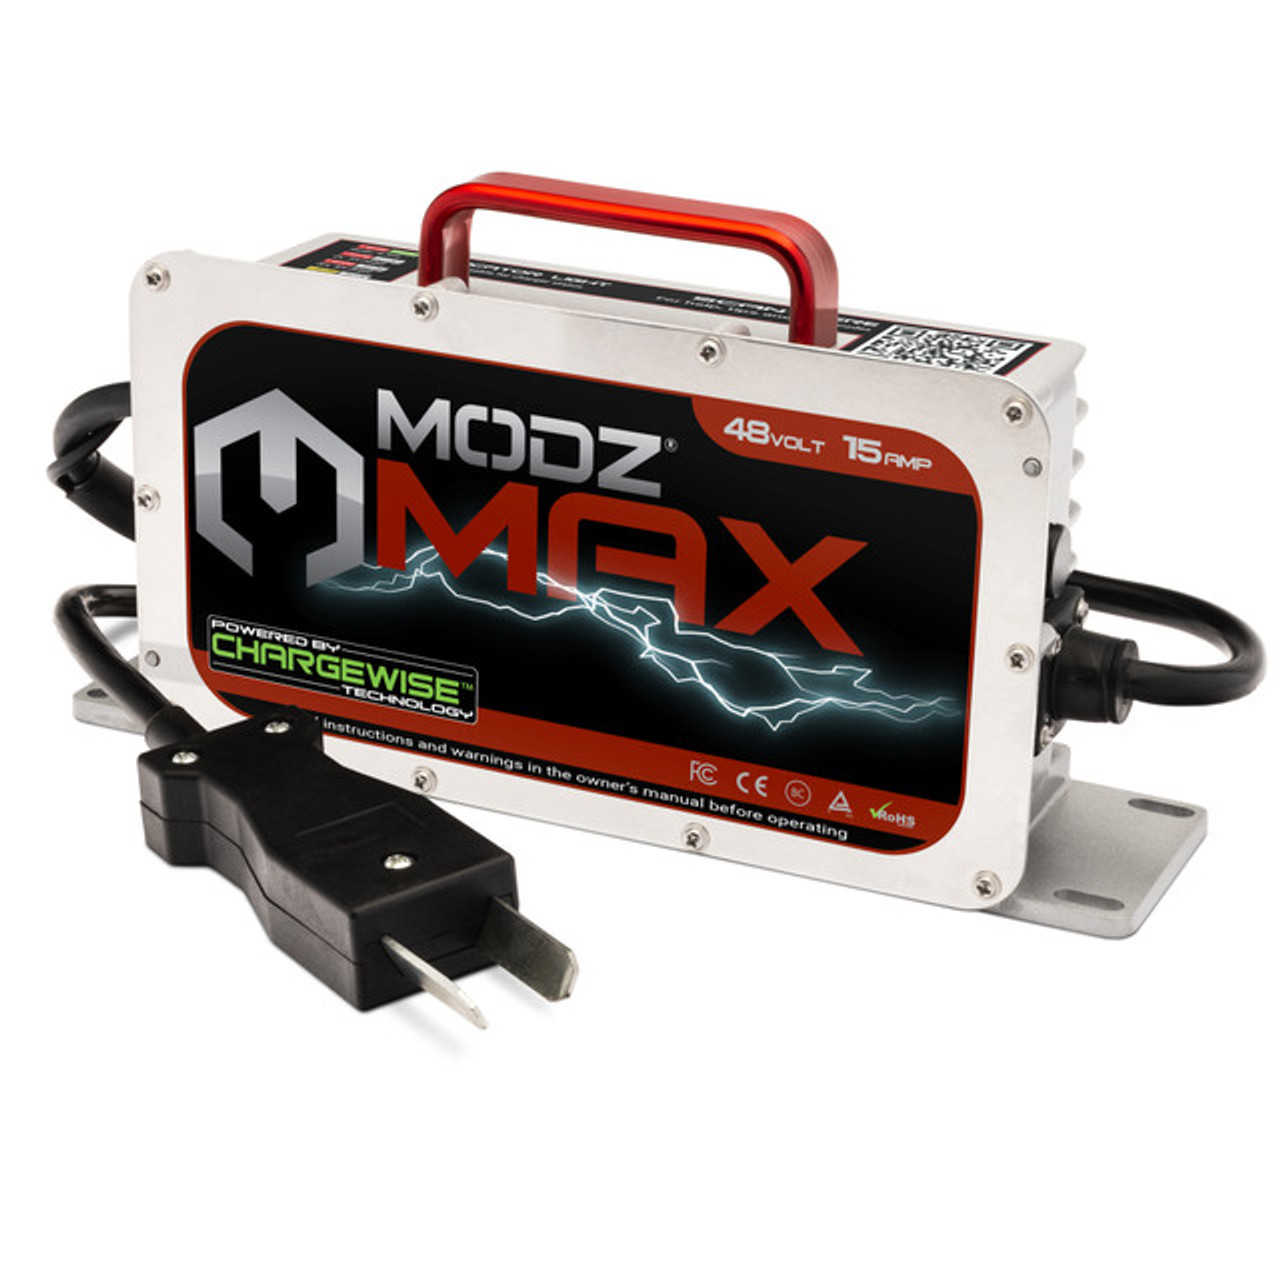 MODZ MAX48 15 AMP GOLF CART BATTERY CHARGER WITH CROWFOOT PLUG